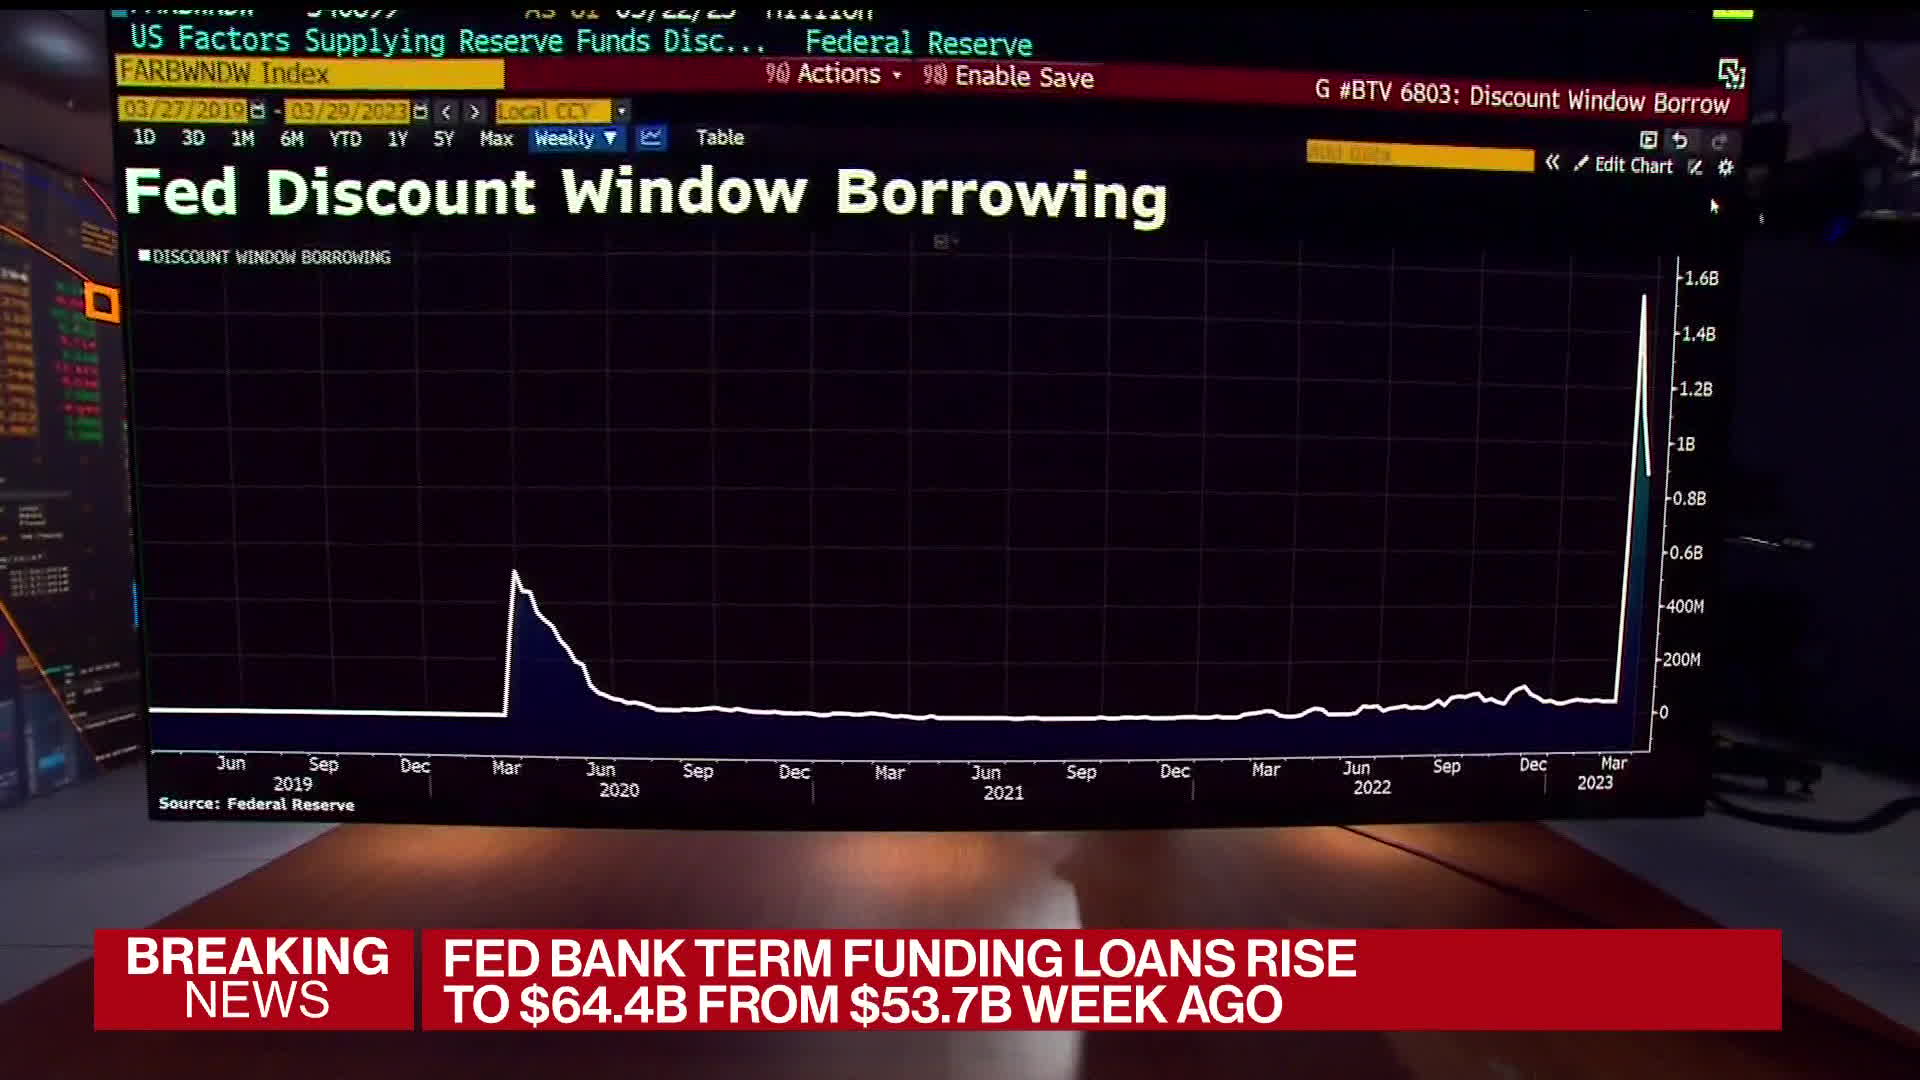 Watch Banks Borrow Much Less From Fed Discount Window Bloomberg